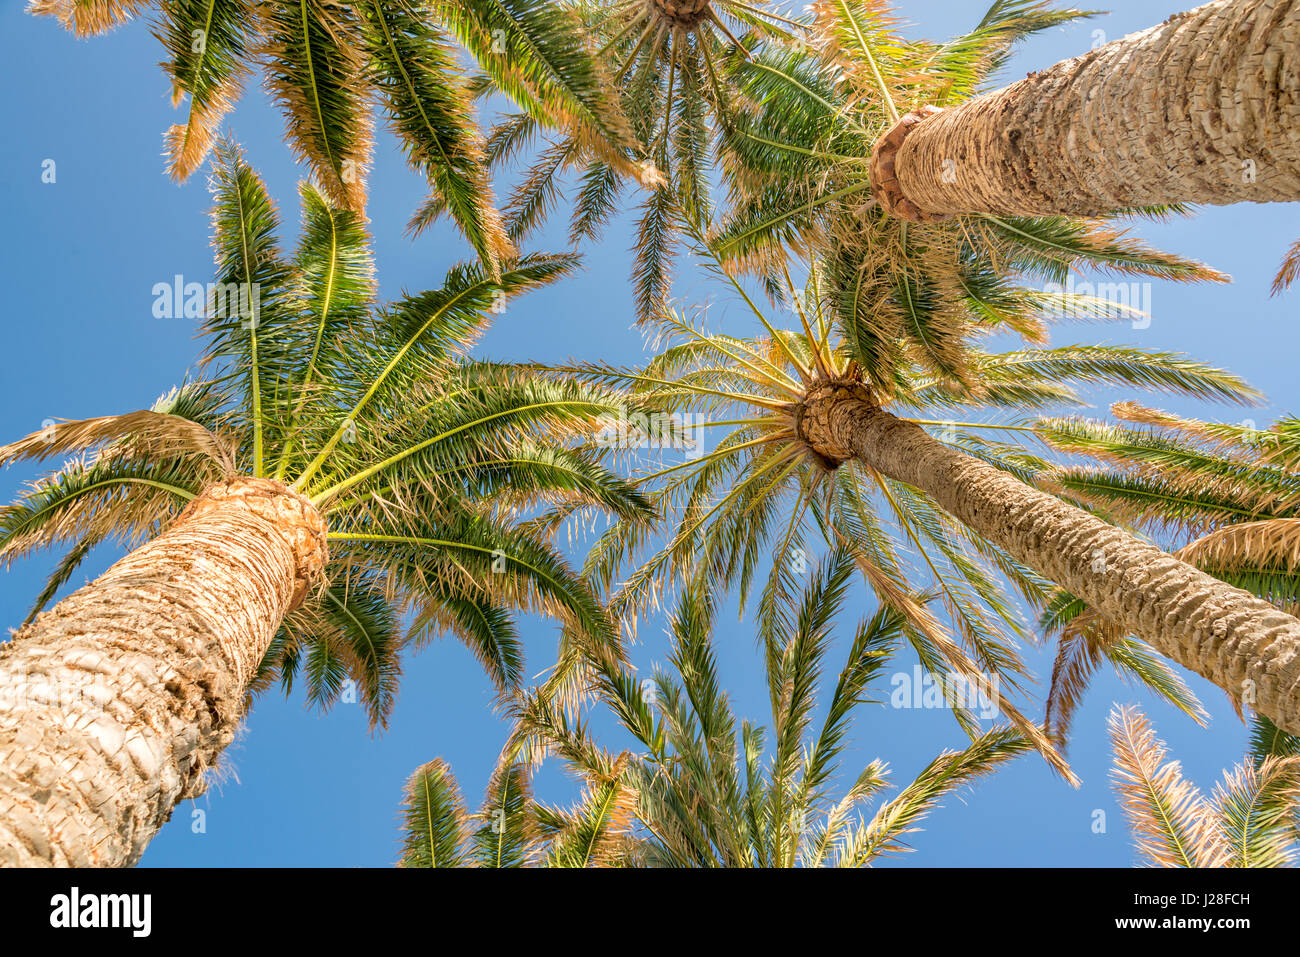 Blue sky with palm trees, view from bottom, tropical travel and tourism concept Stock Photo